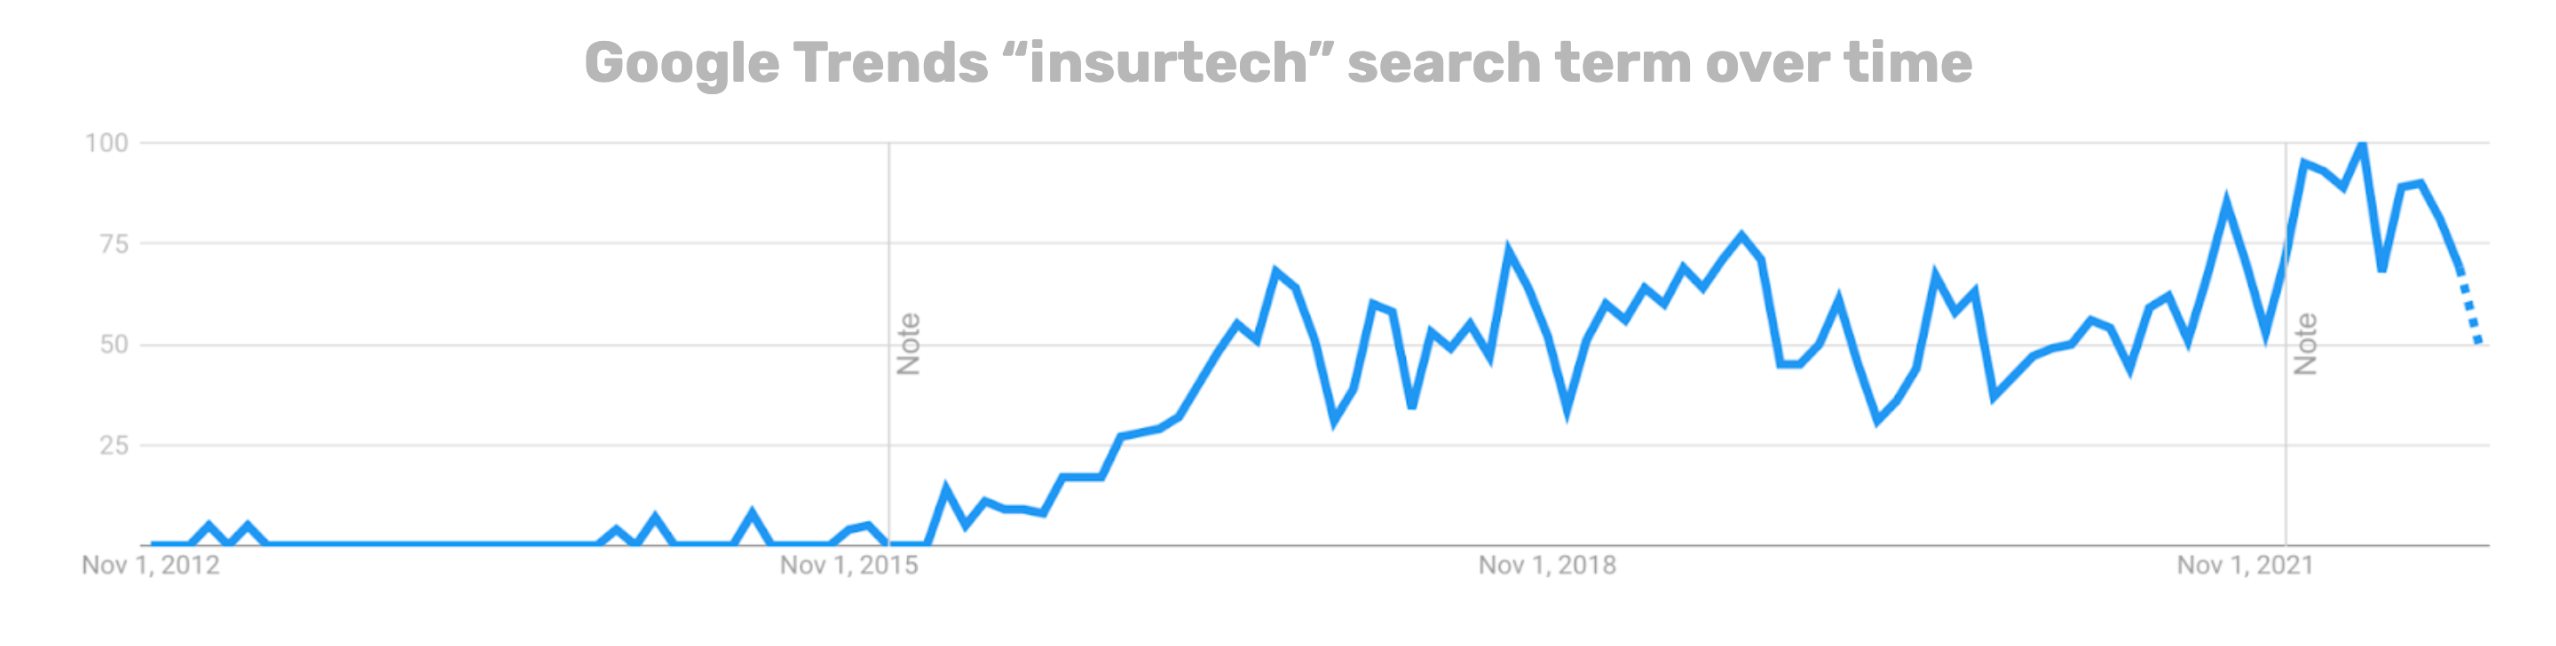 Google Trends "insurtech" search over time